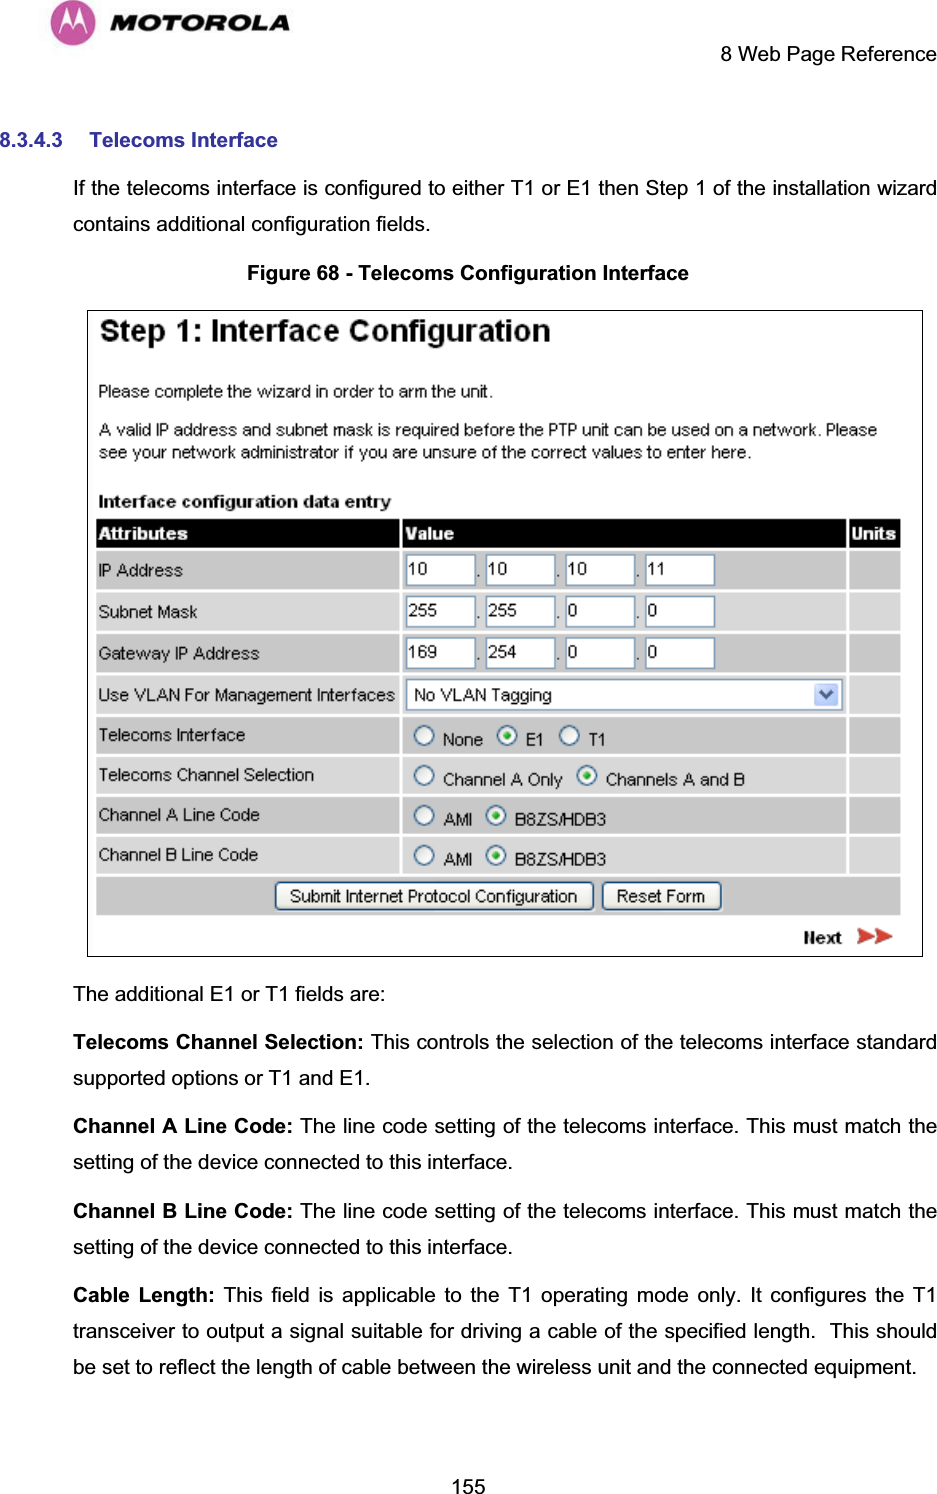     8 Web Page Reference  1558.3.4.3 Telecoms Interface If the telecoms interface is configured to either T1 or E1 then Step 1 of the installation wizard contains additional configuration fields. Figure 68 - Telecoms Configuration Interface  The additional E1 or T1 fields are: Telecoms Channel Selection: This controls the selection of the telecoms interface standard supported options or T1 and E1. Channel A Line Code: The line code setting of the telecoms interface. This must match the setting of the device connected to this interface. Channel B Line Code: The line code setting of the telecoms interface. This must match the setting of the device connected to this interface. Cable Length: This field is applicable to the T1 operating mode only. It configures the T1 transceiver to output a signal suitable for driving a cable of the specified length.  This should be set to reflect the length of cable between the wireless unit and the connected equipment. 